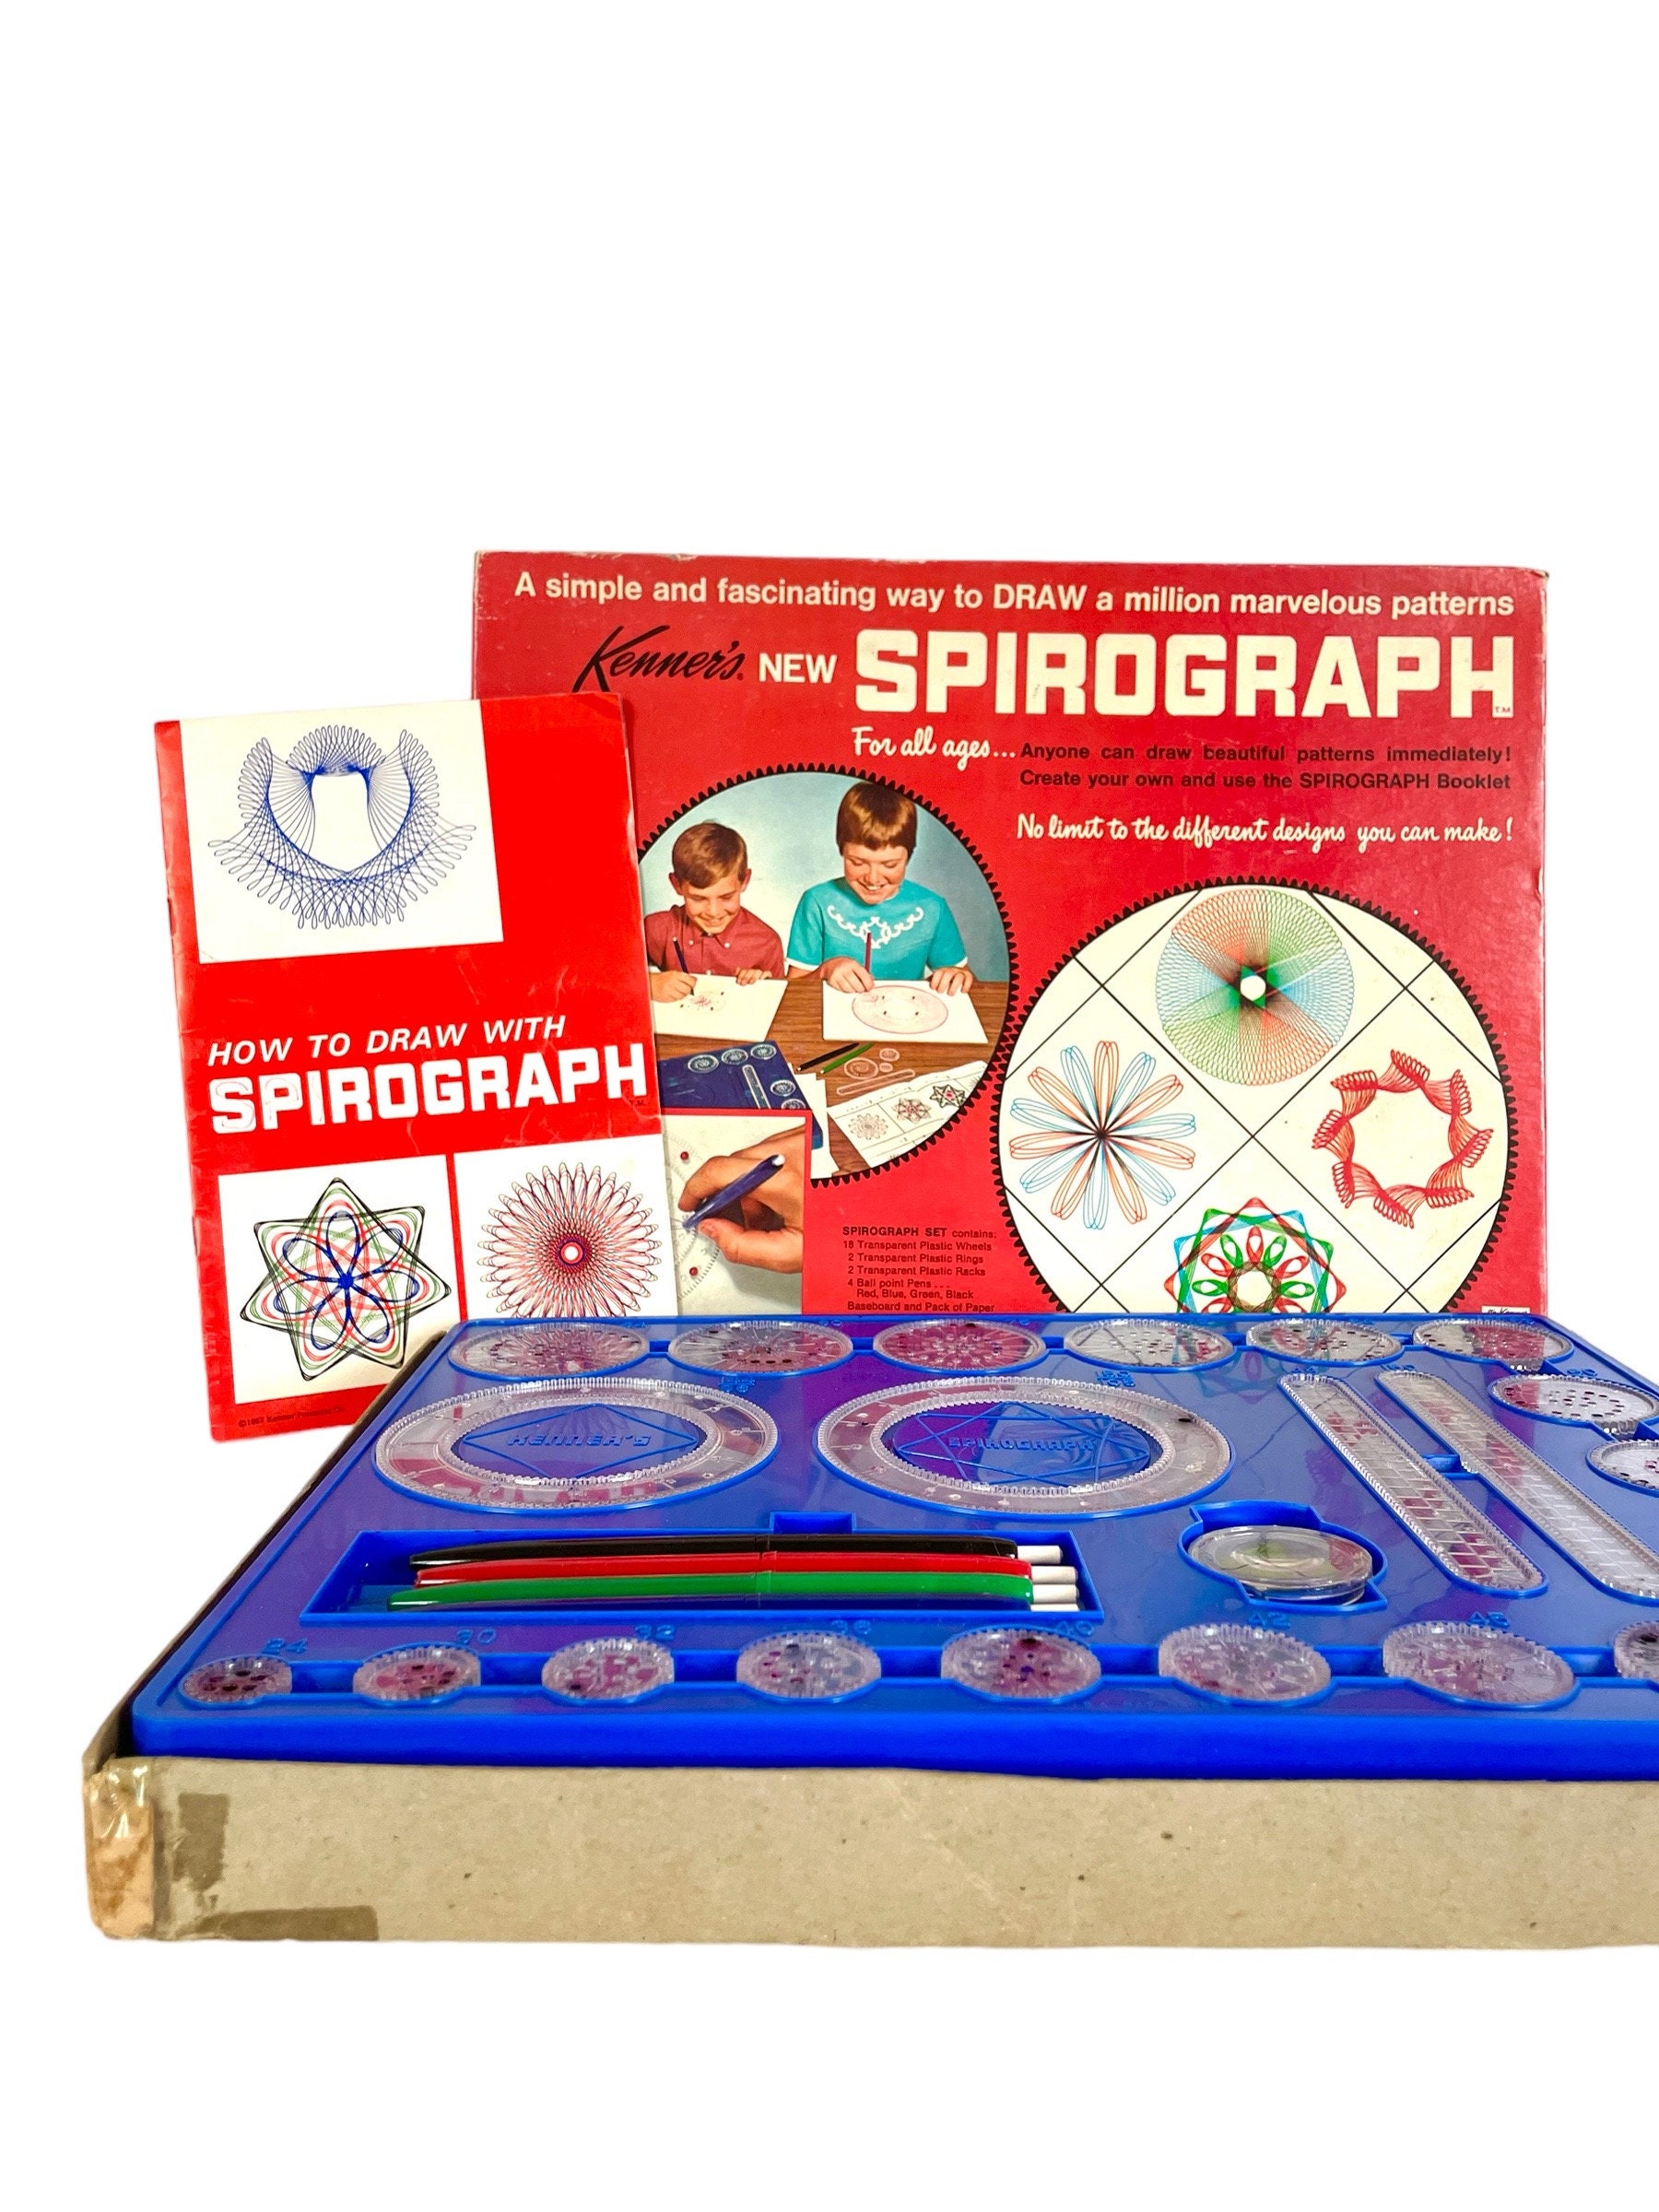 Vintage 1986 Kenner Spirograph Pre-Owned ONLY missing ring holder(#60 was  found)